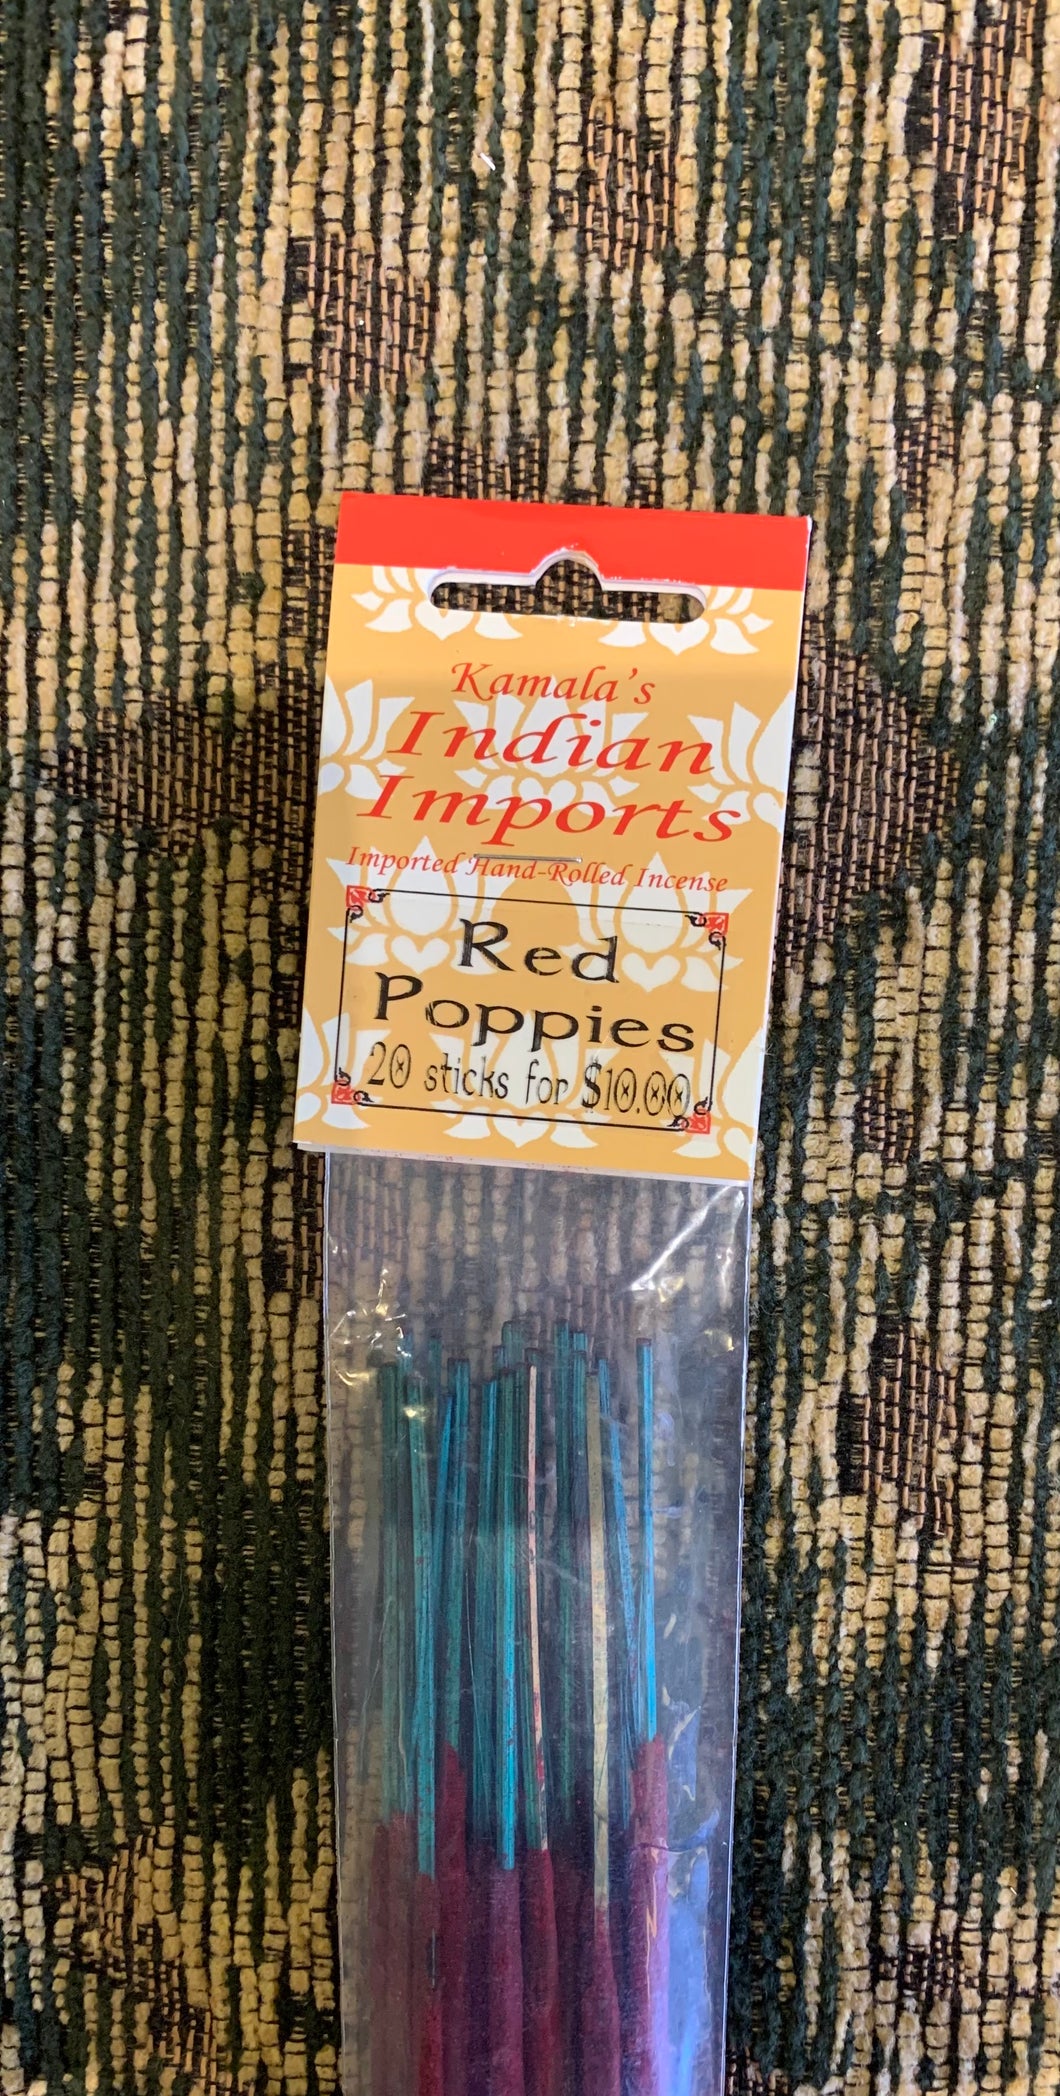 Red Poppies stick incense